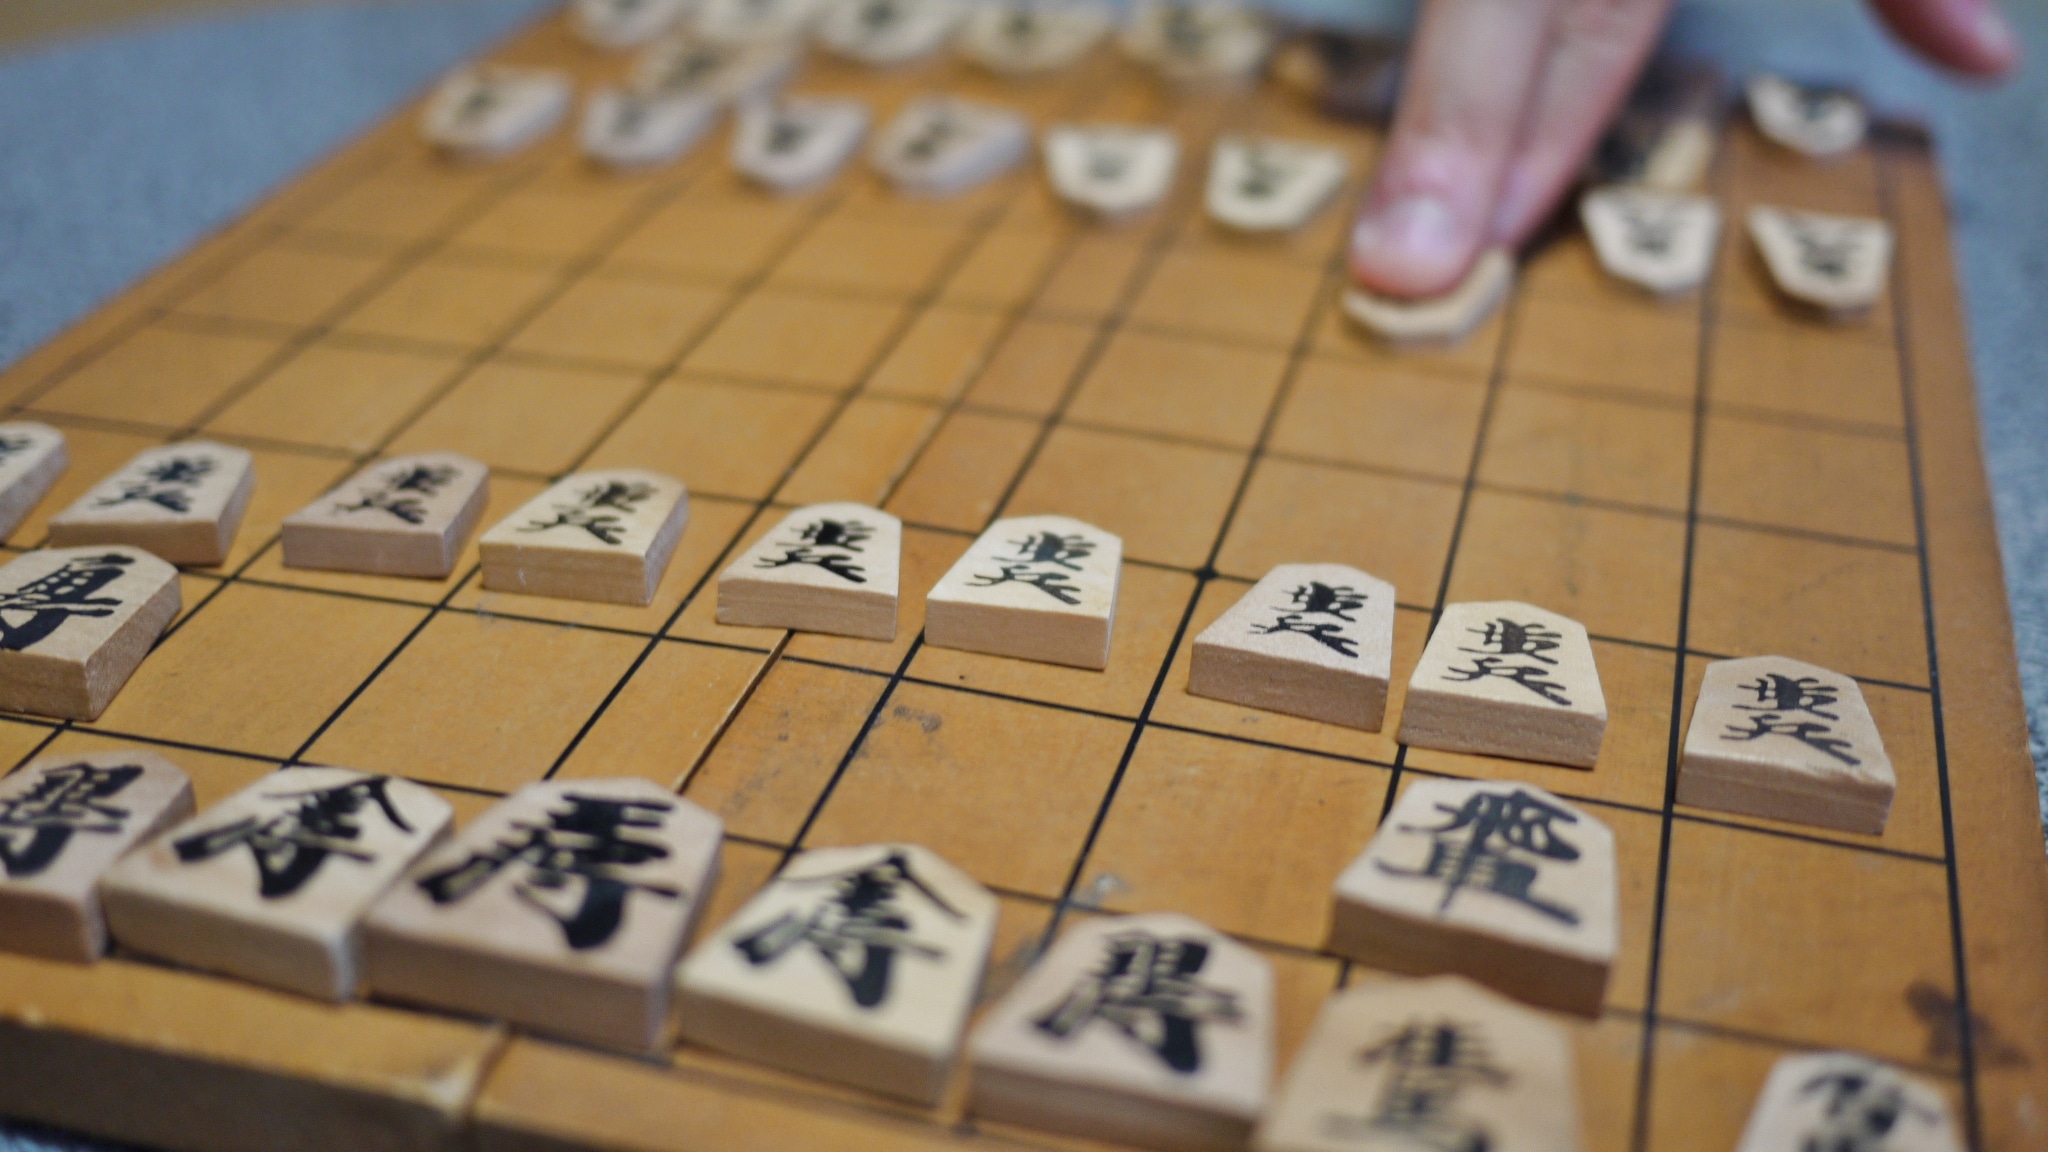 * [Room] We have shogi and Othello that you can enjoy during your stay.